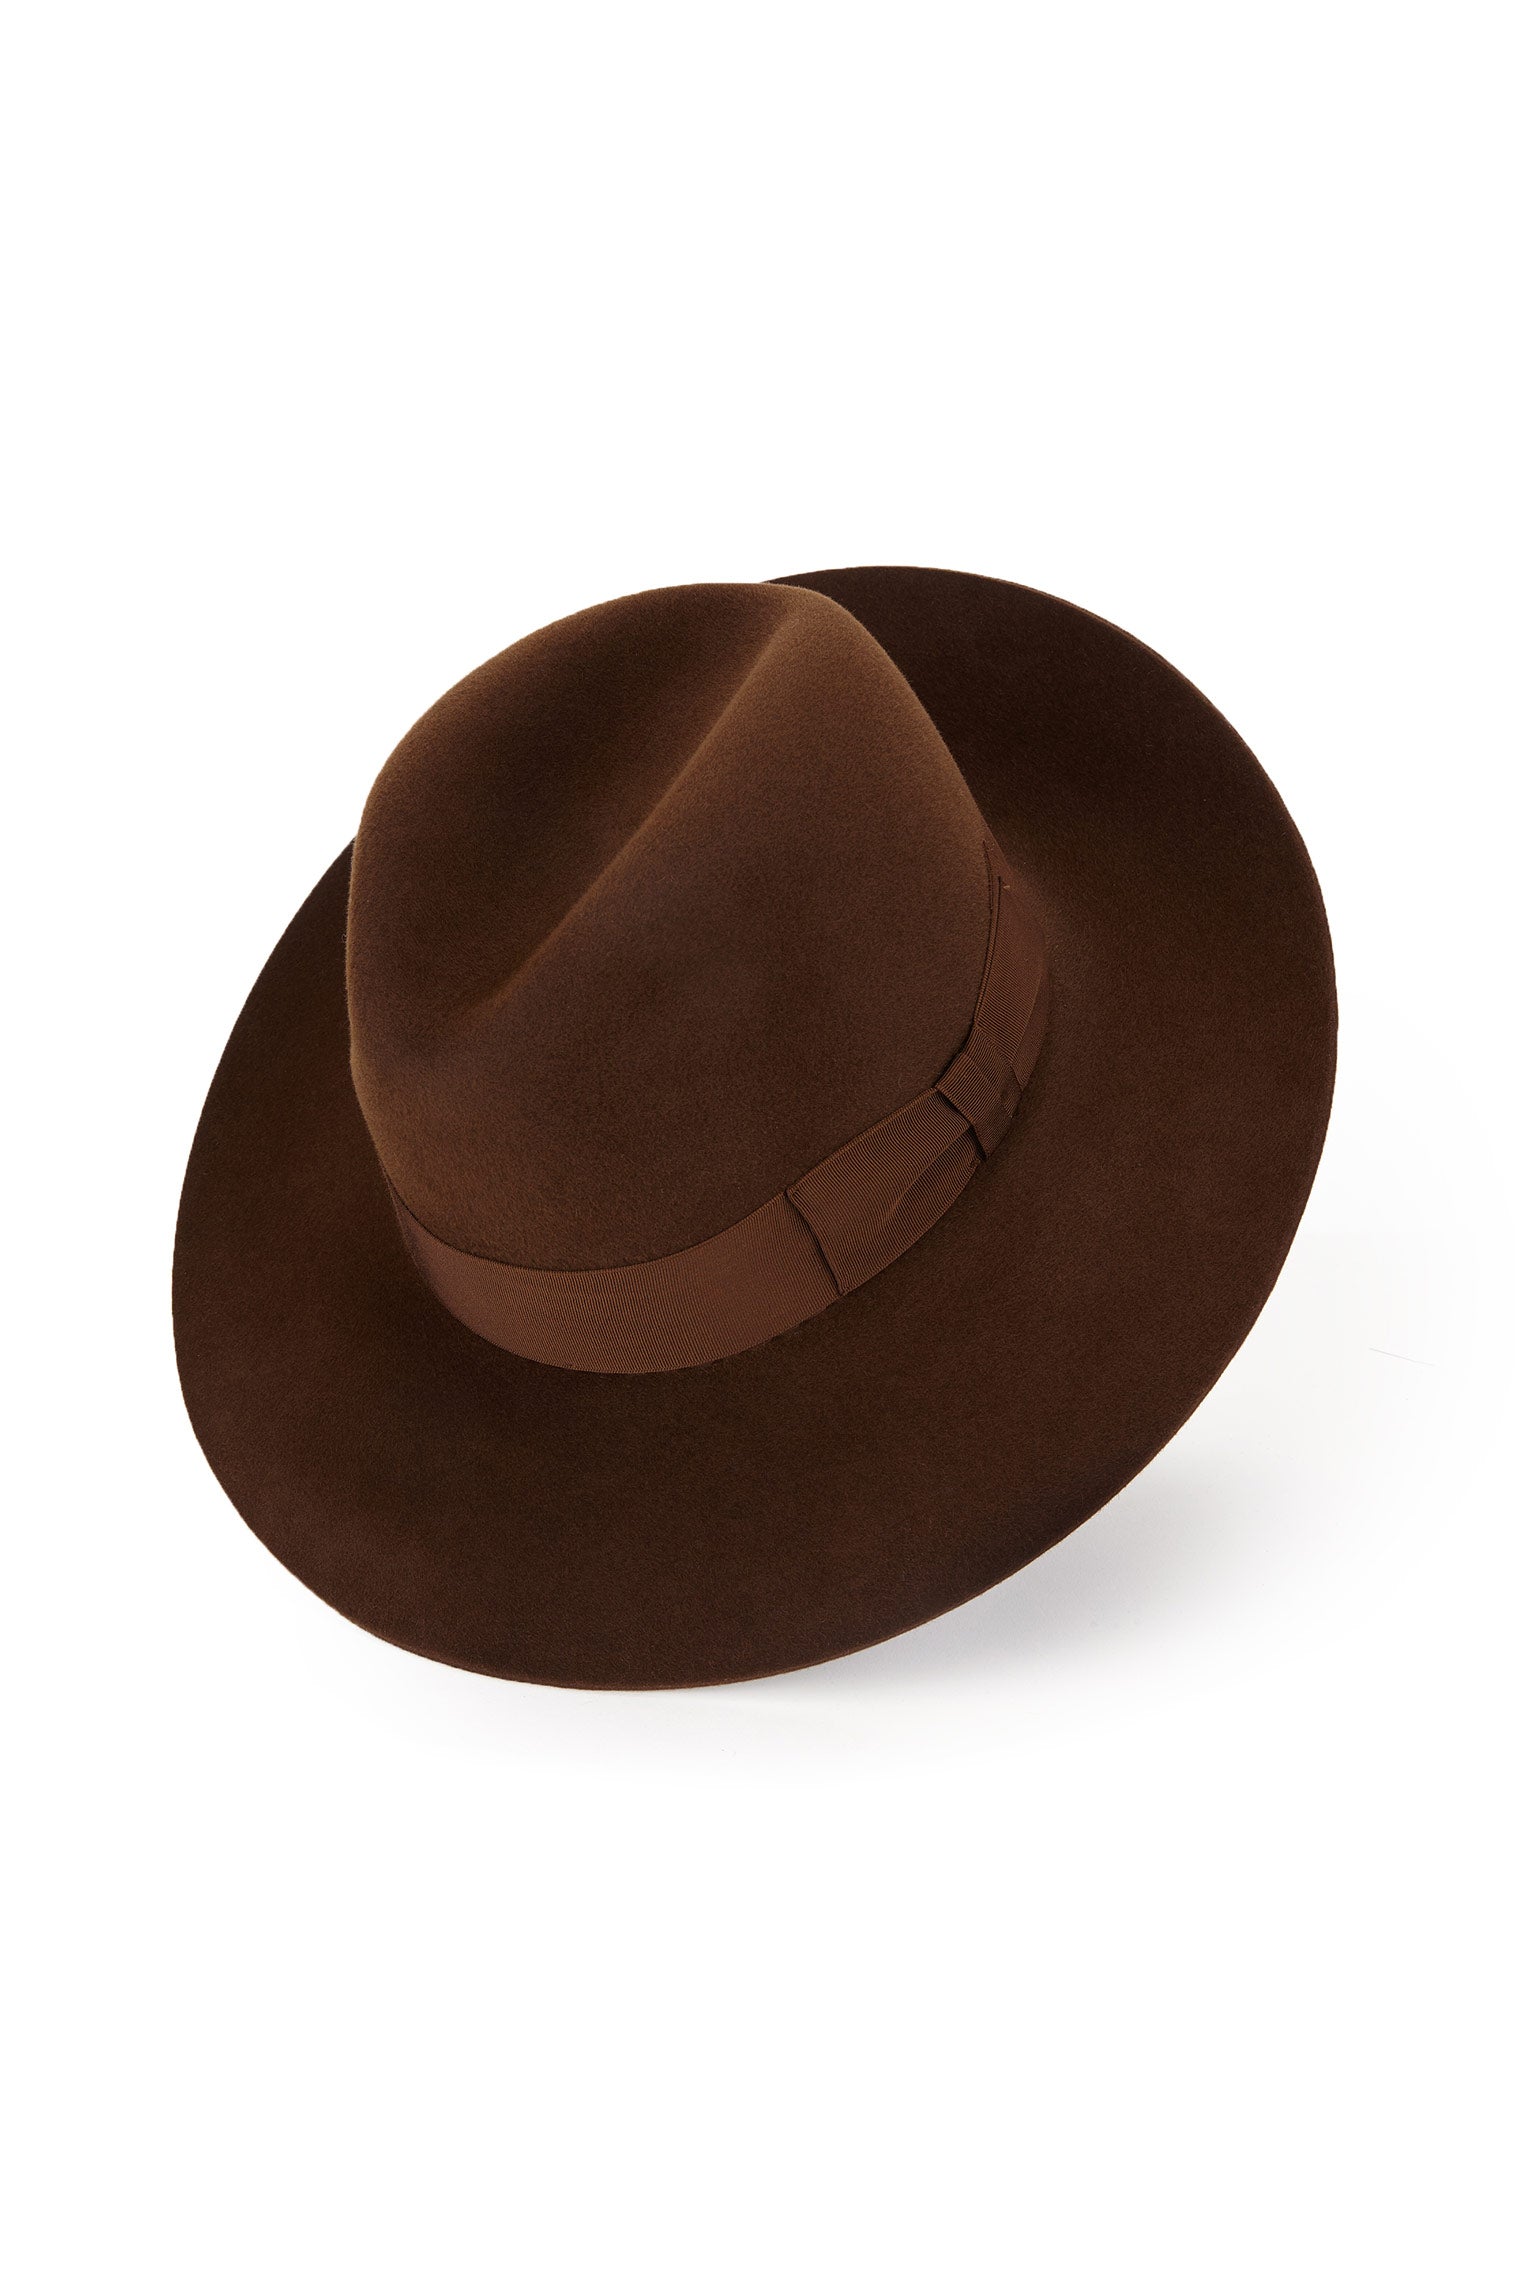 Louisiana Fedora - Hats for Square Face Shapes - Lock & Co. Hatters London UK